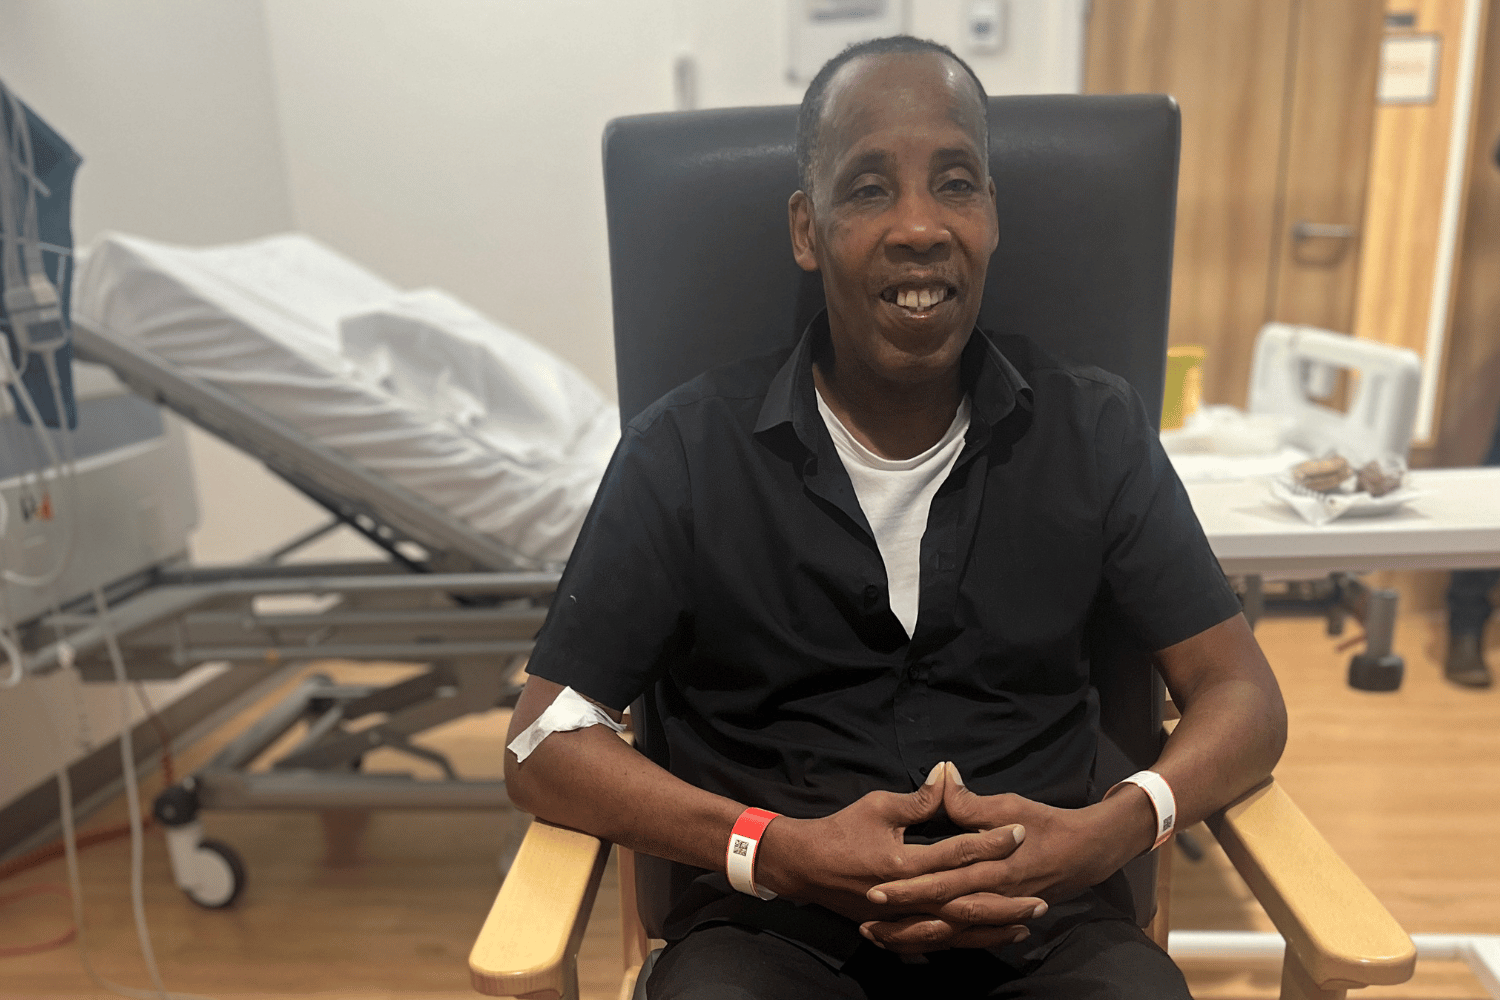 A man sat in a chair in a hospital bedroom, smiling.